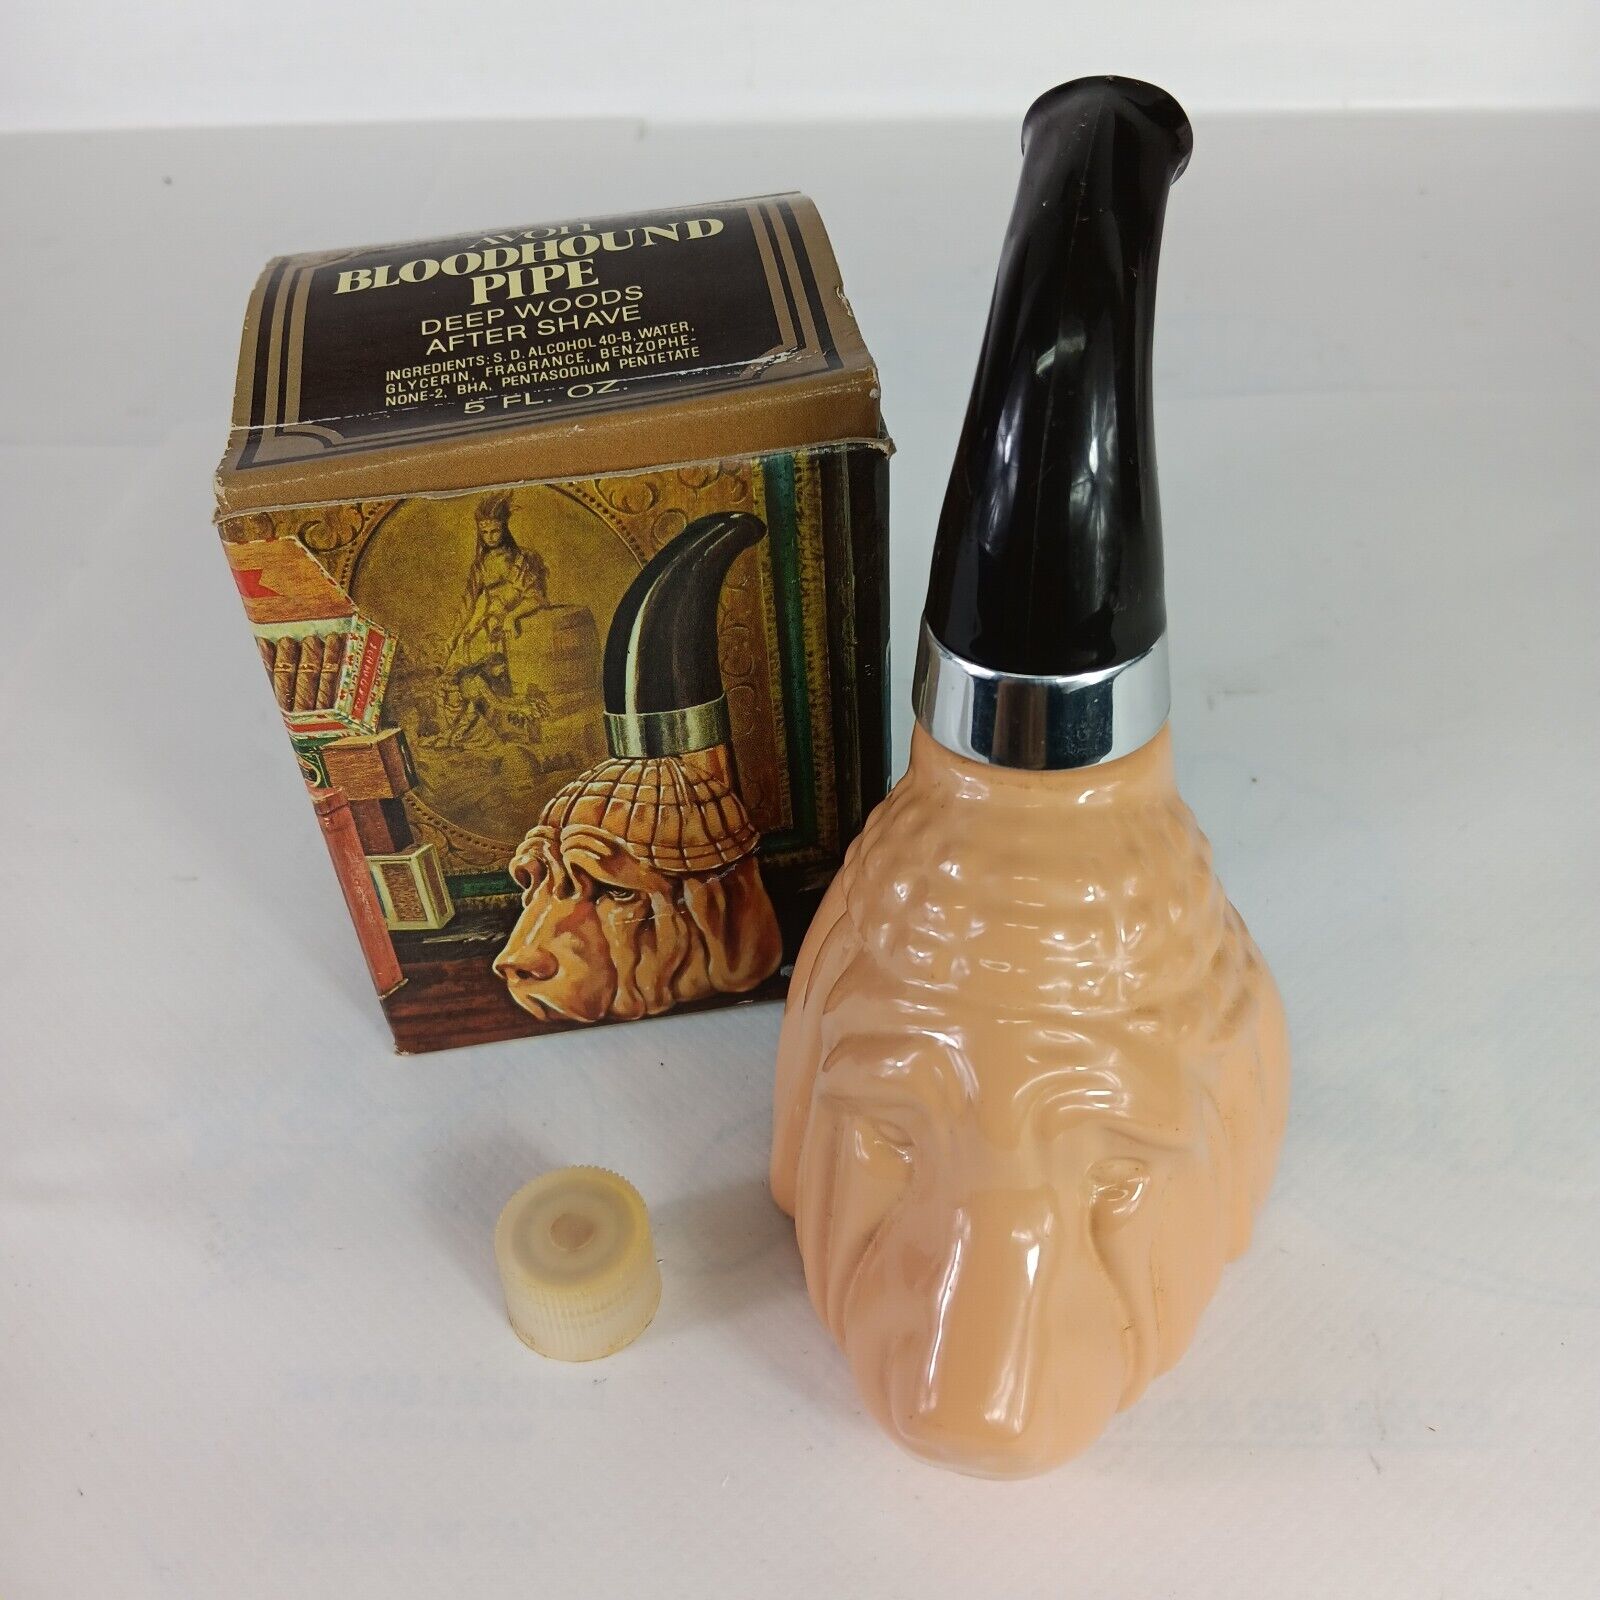 Vintage Avon Bloodhound Pipe Wild Country After Shave (FULL) In Original Box